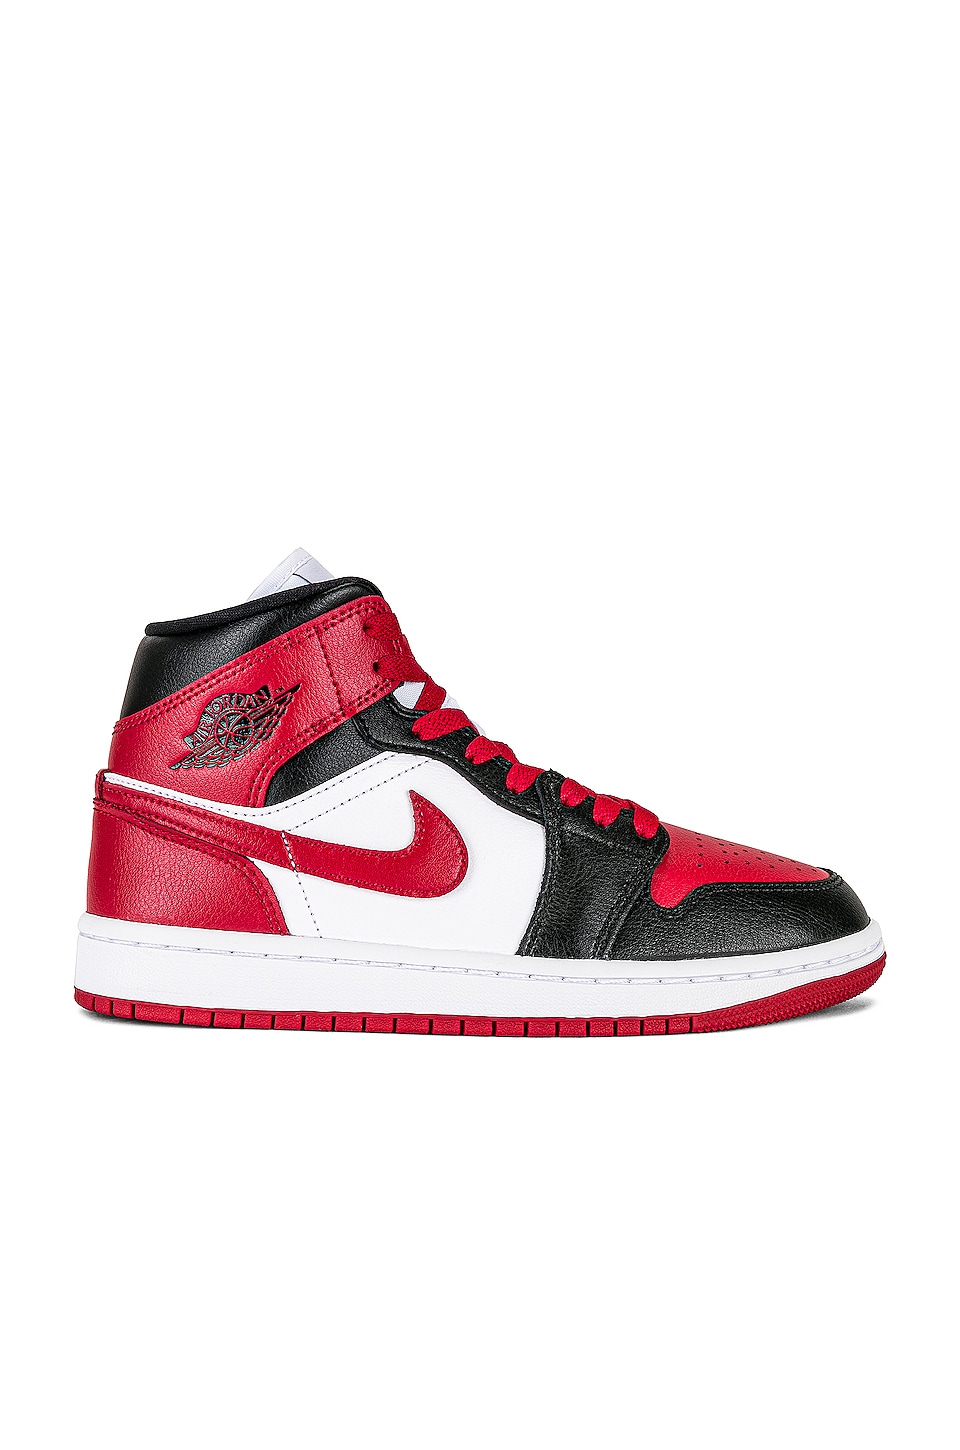 black and red and white jordans